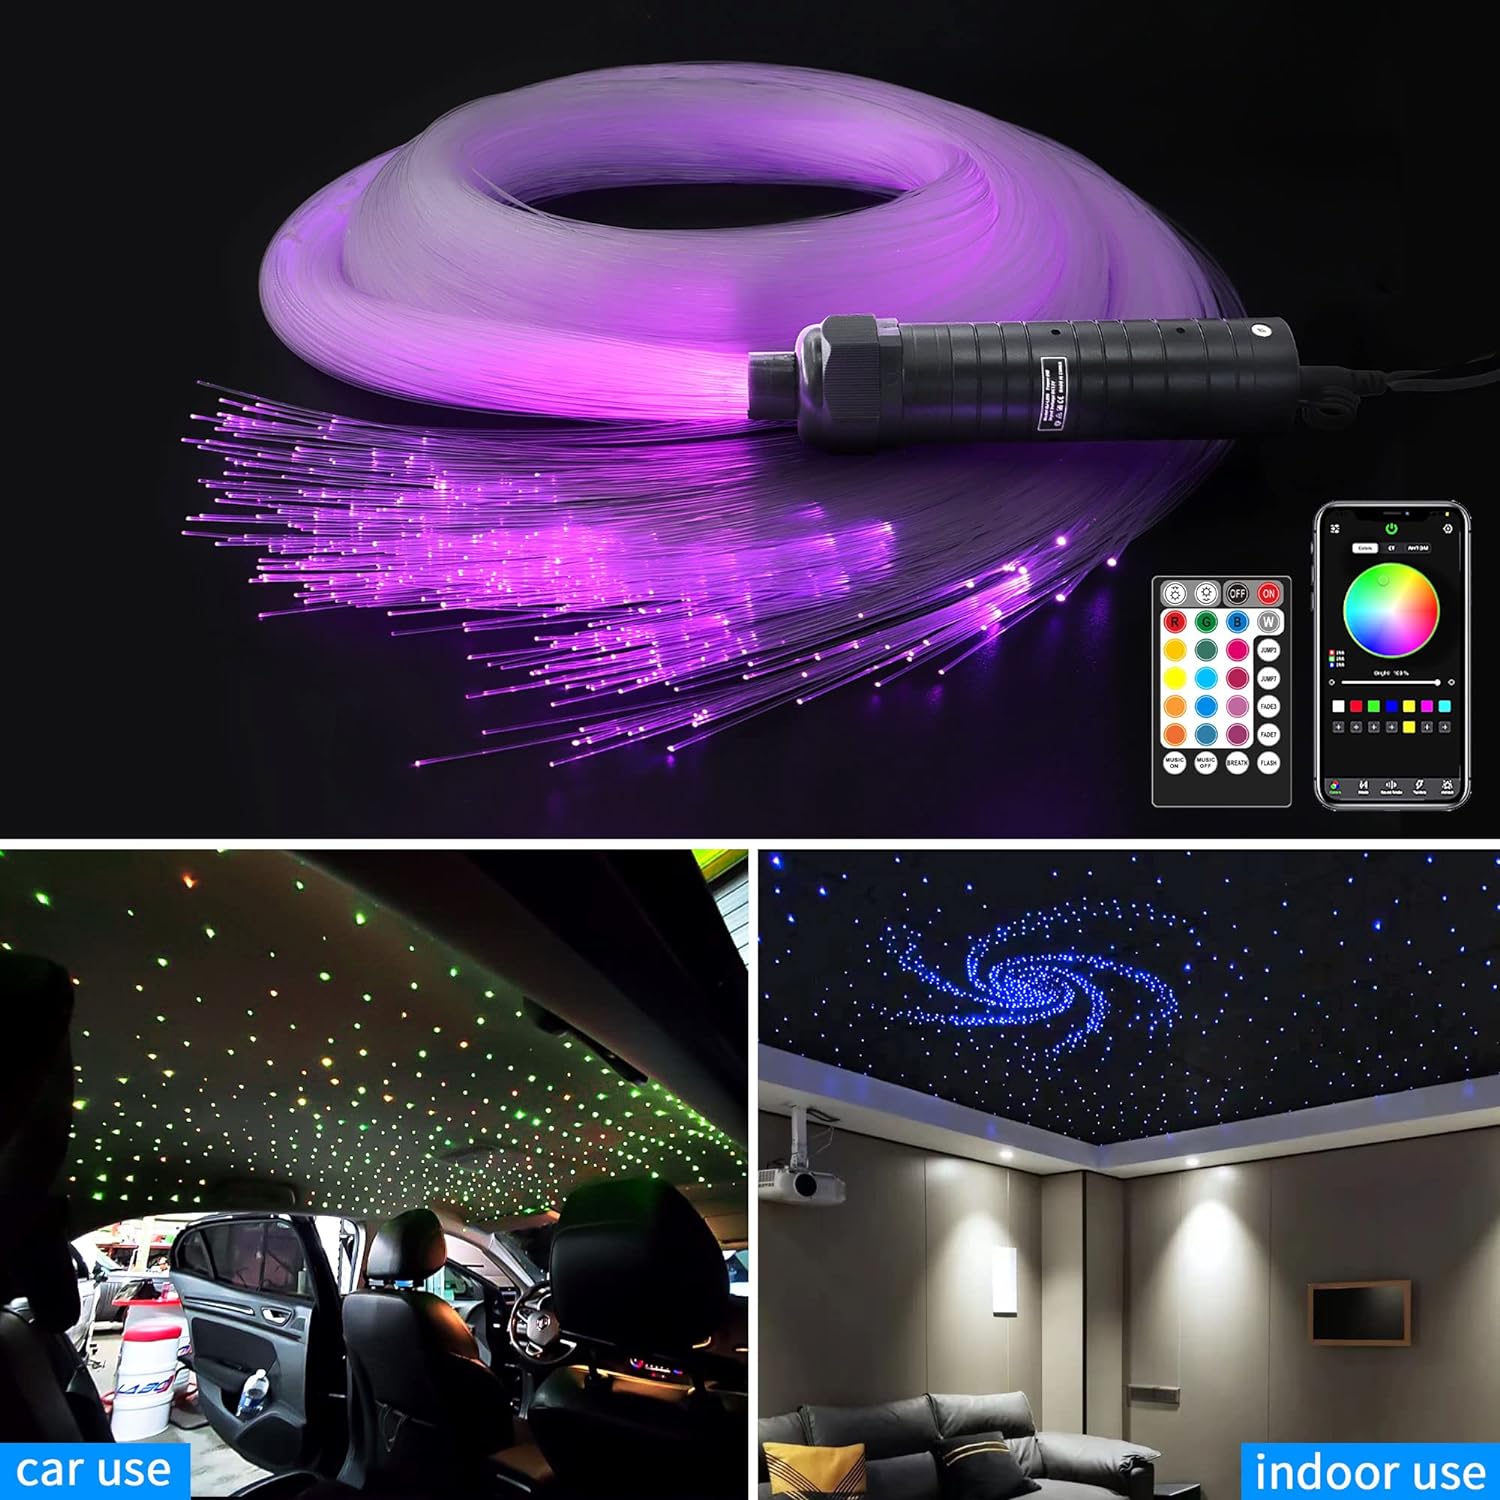 ATOKEE Fiber Optic Lights, 6W Starlight Headliner Kit for Car Interior Roof, 300pcs*0.03in*9.8ft Star Lights for Car with APP Control